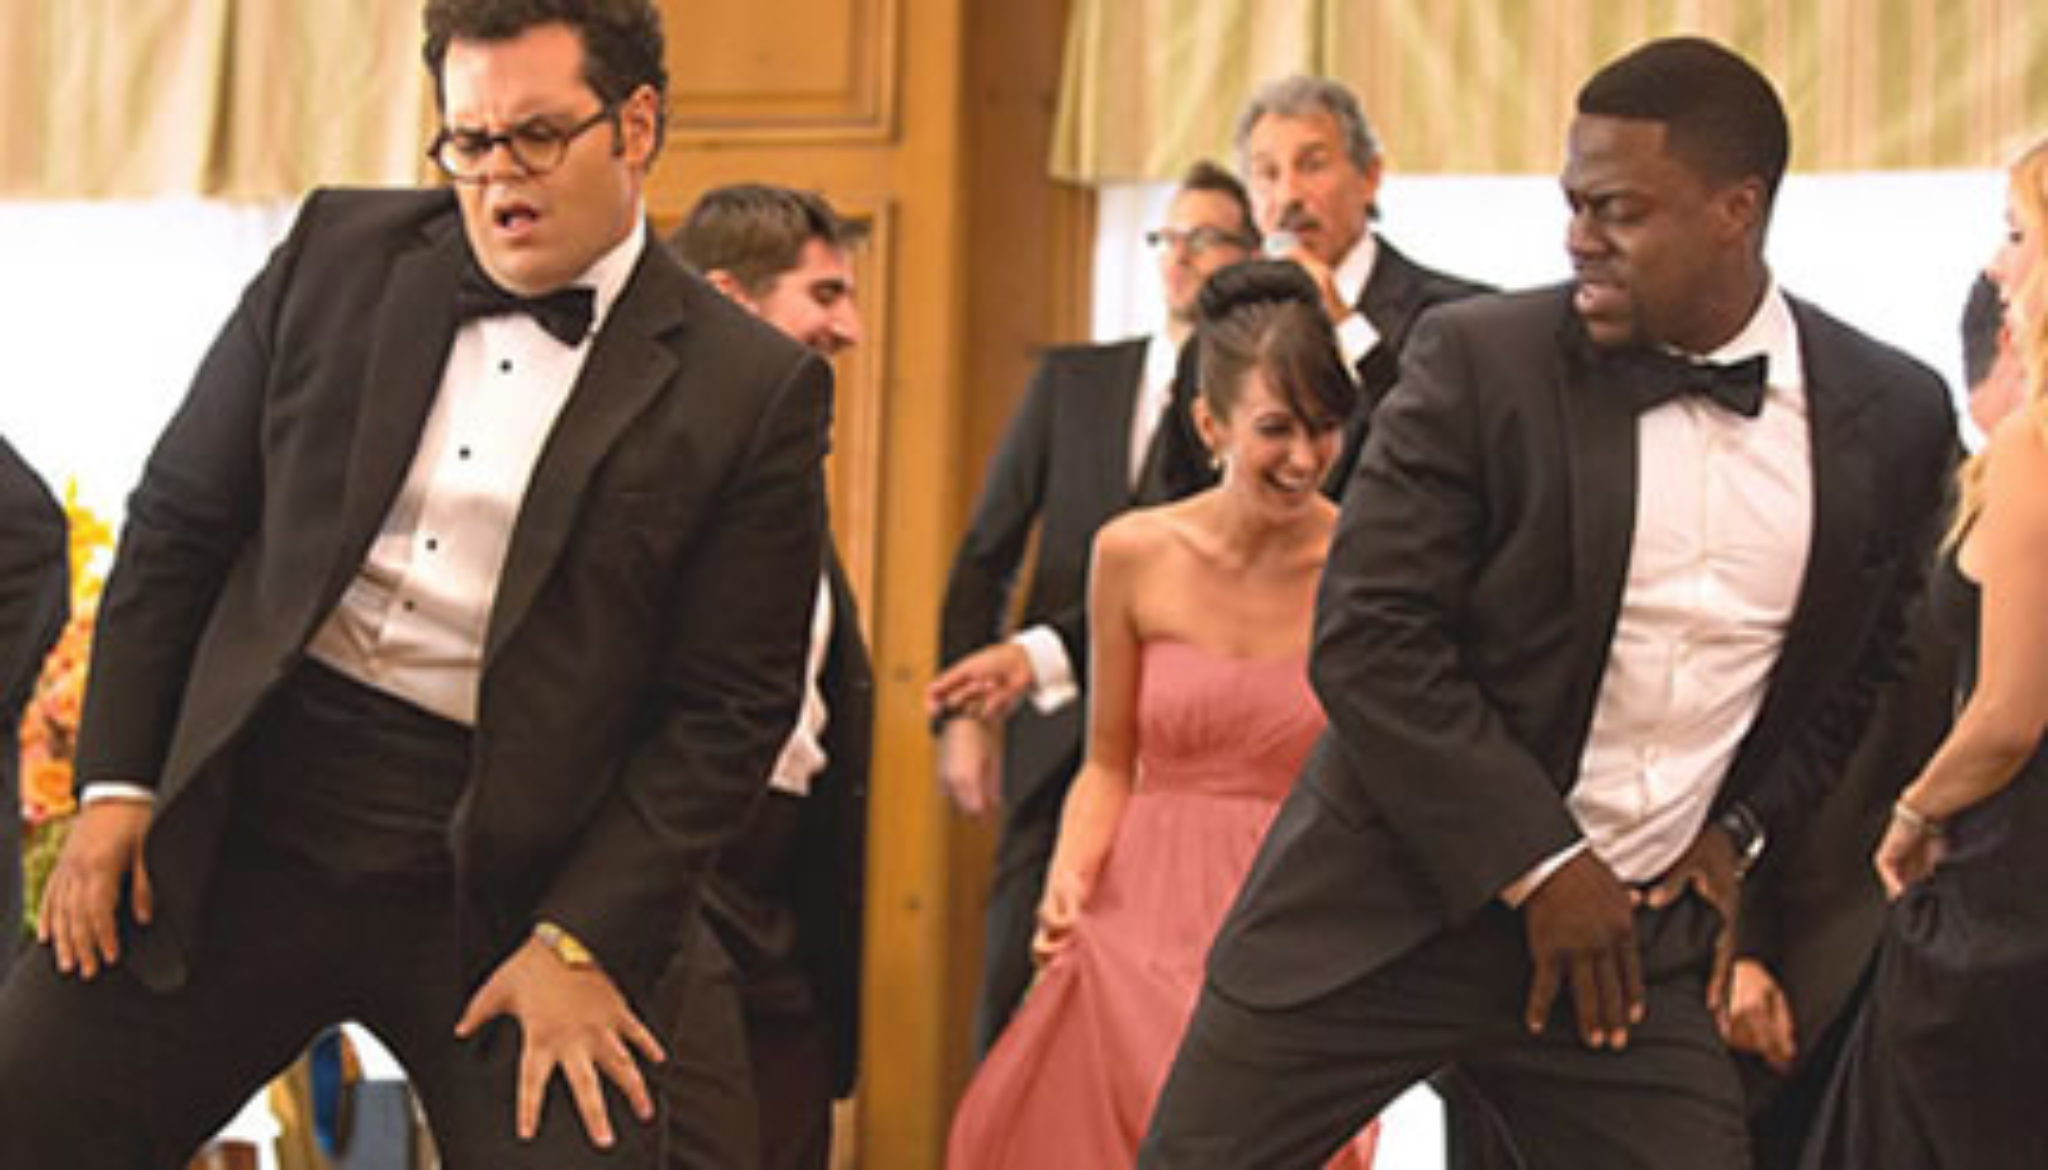 The Wedding Ringer Plugged In